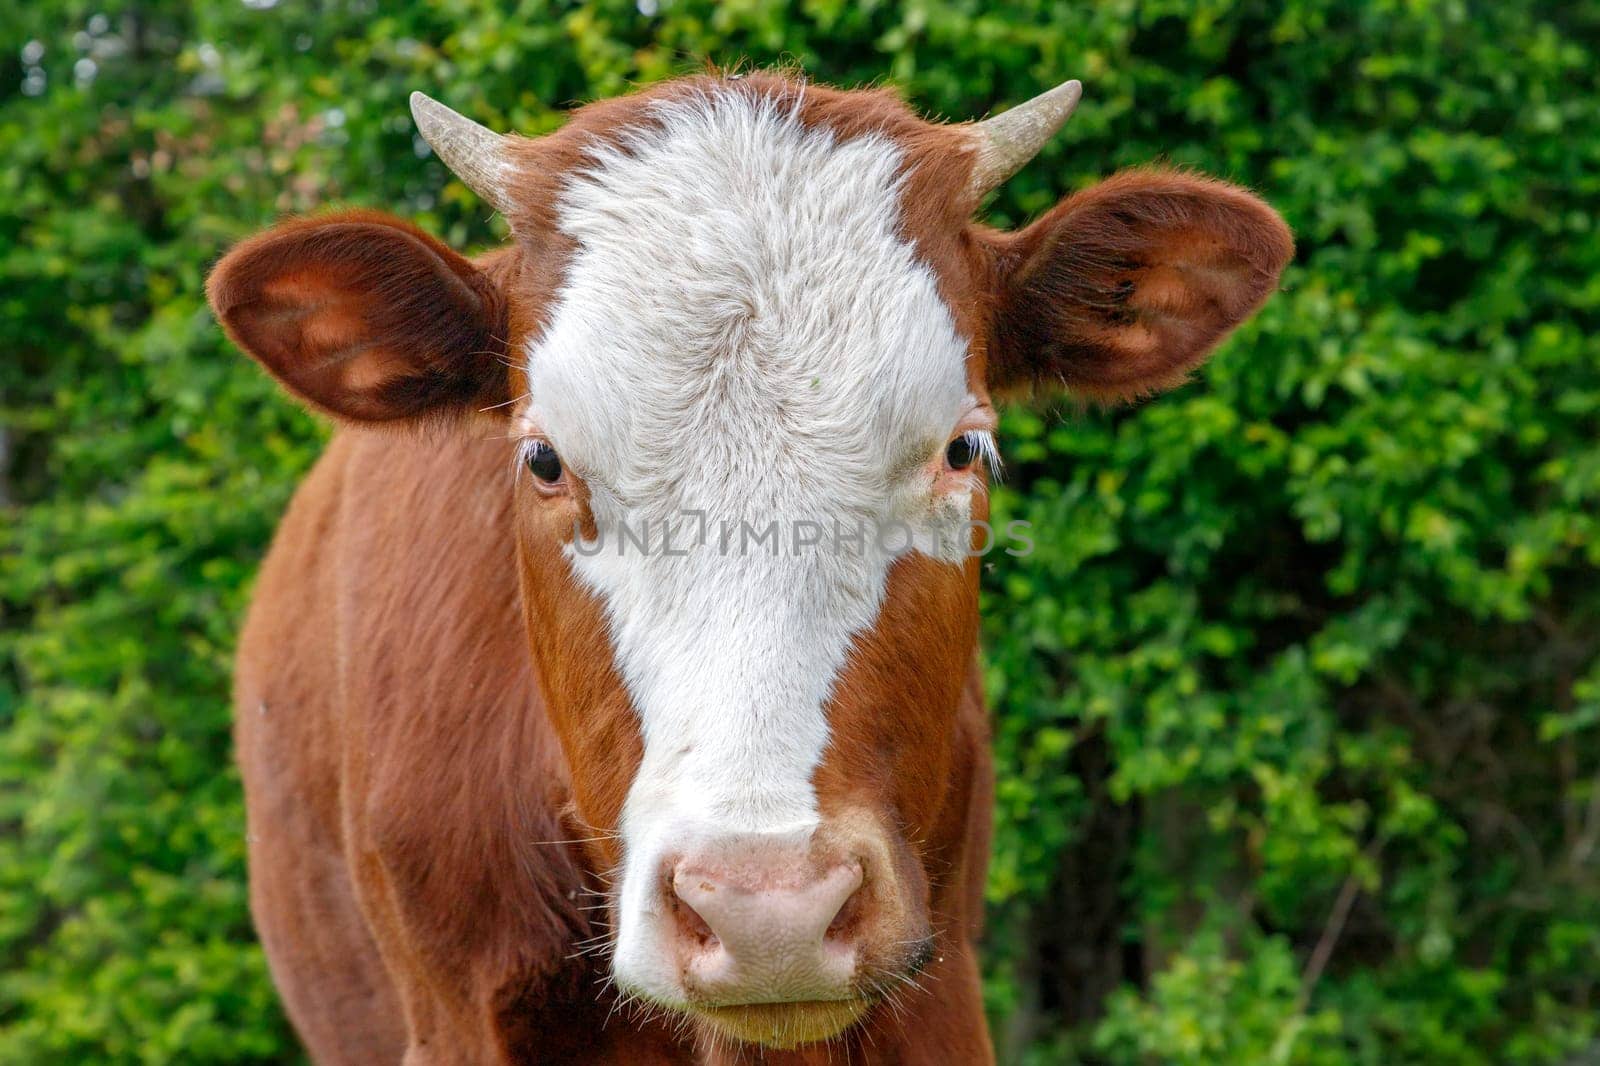 A young brown calf, cow, looking at the camera